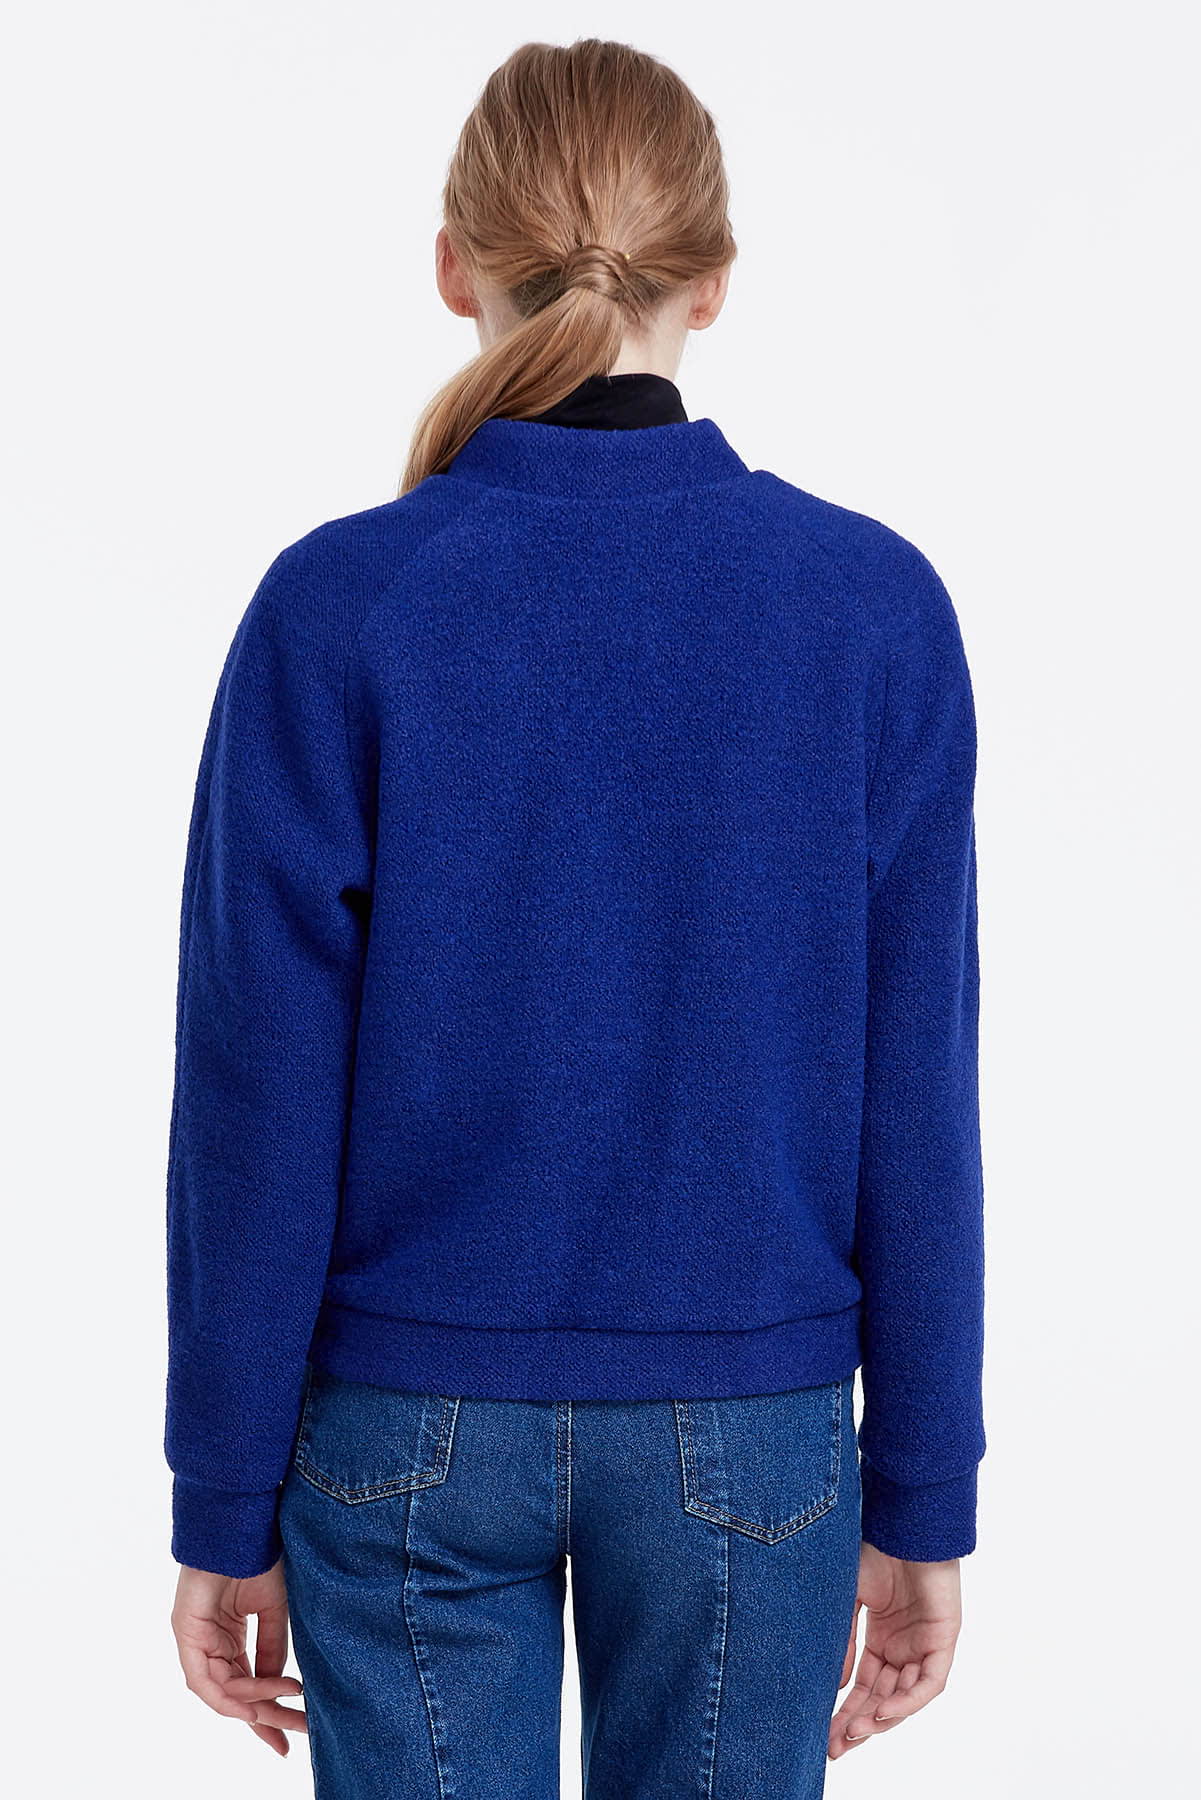 Blue jacket with an asymmetrical closing , photo 5